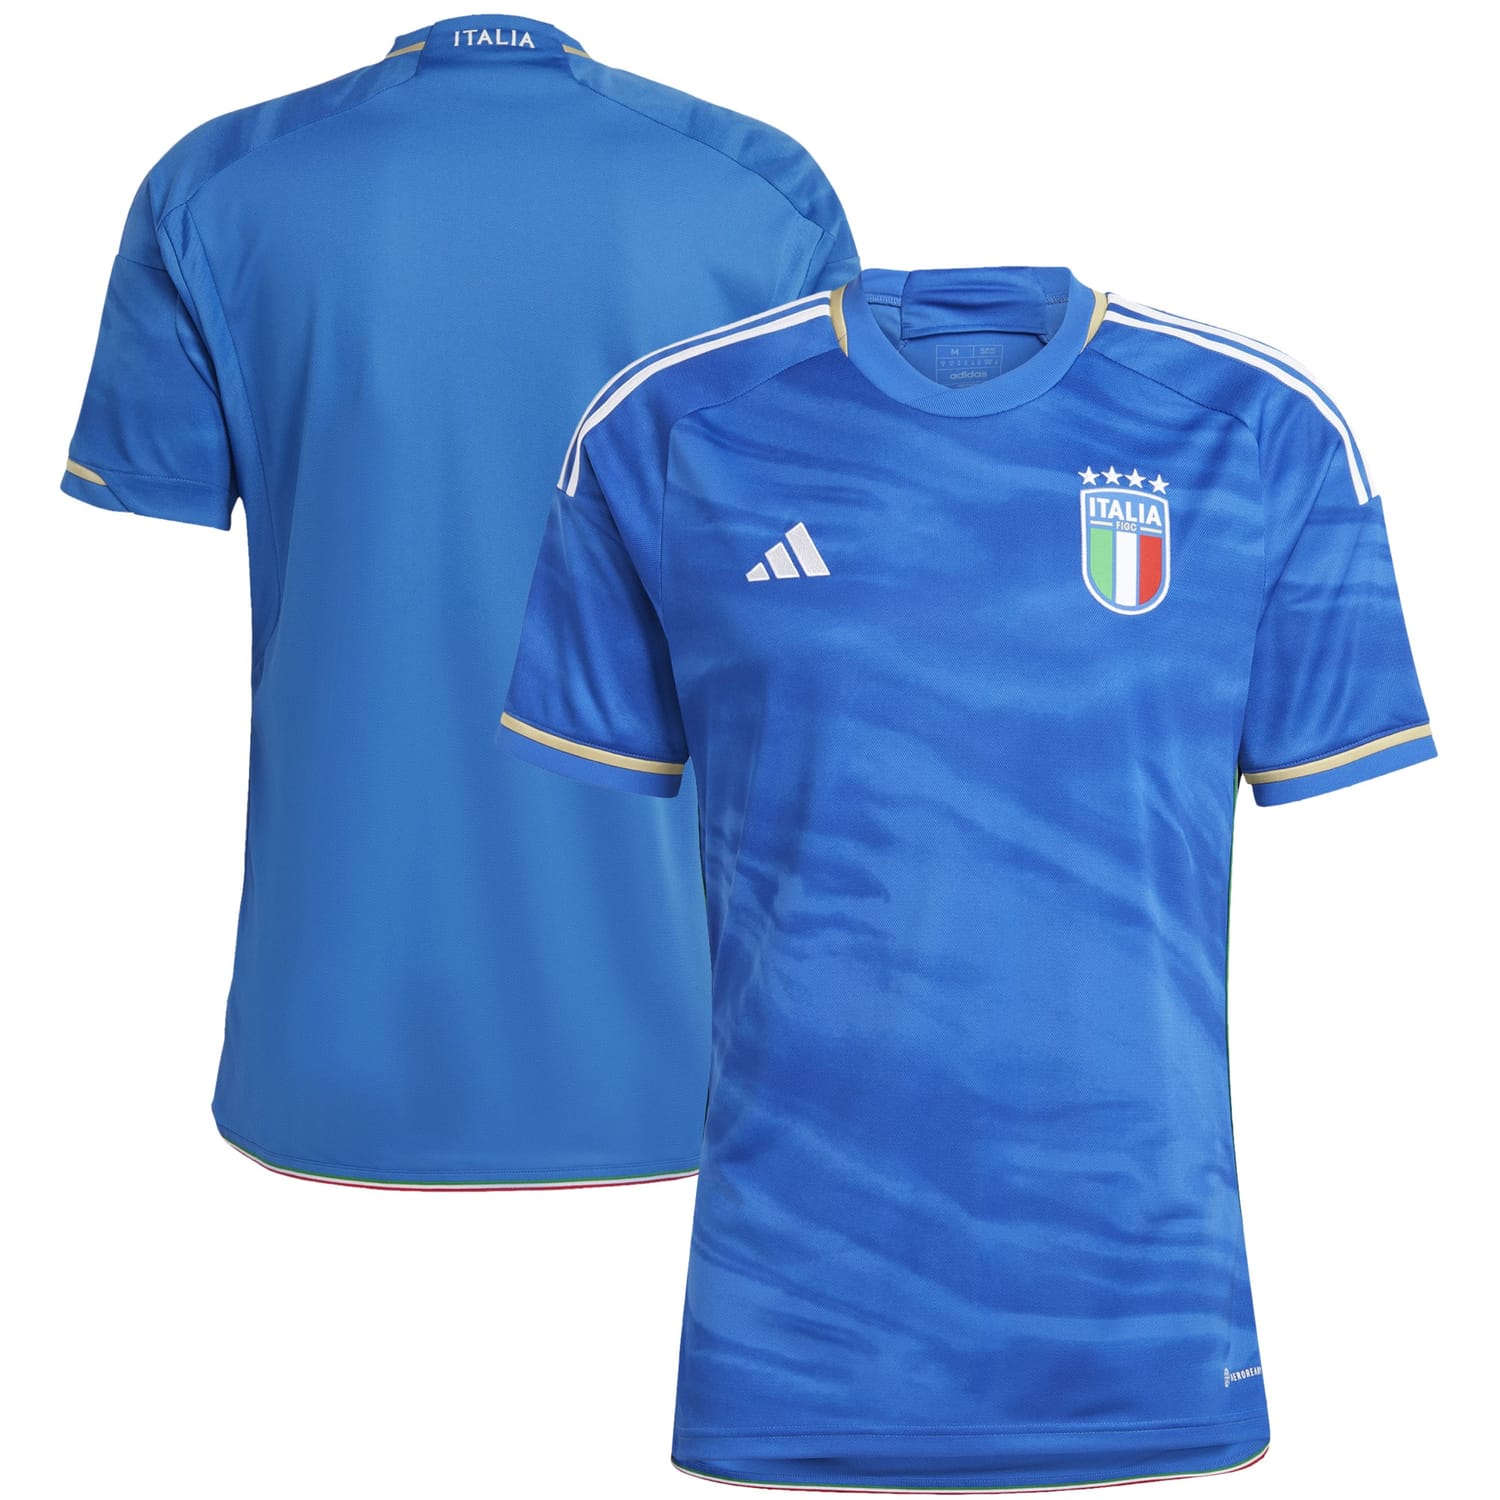 Italy National Team Home Jersey Shirt for Men